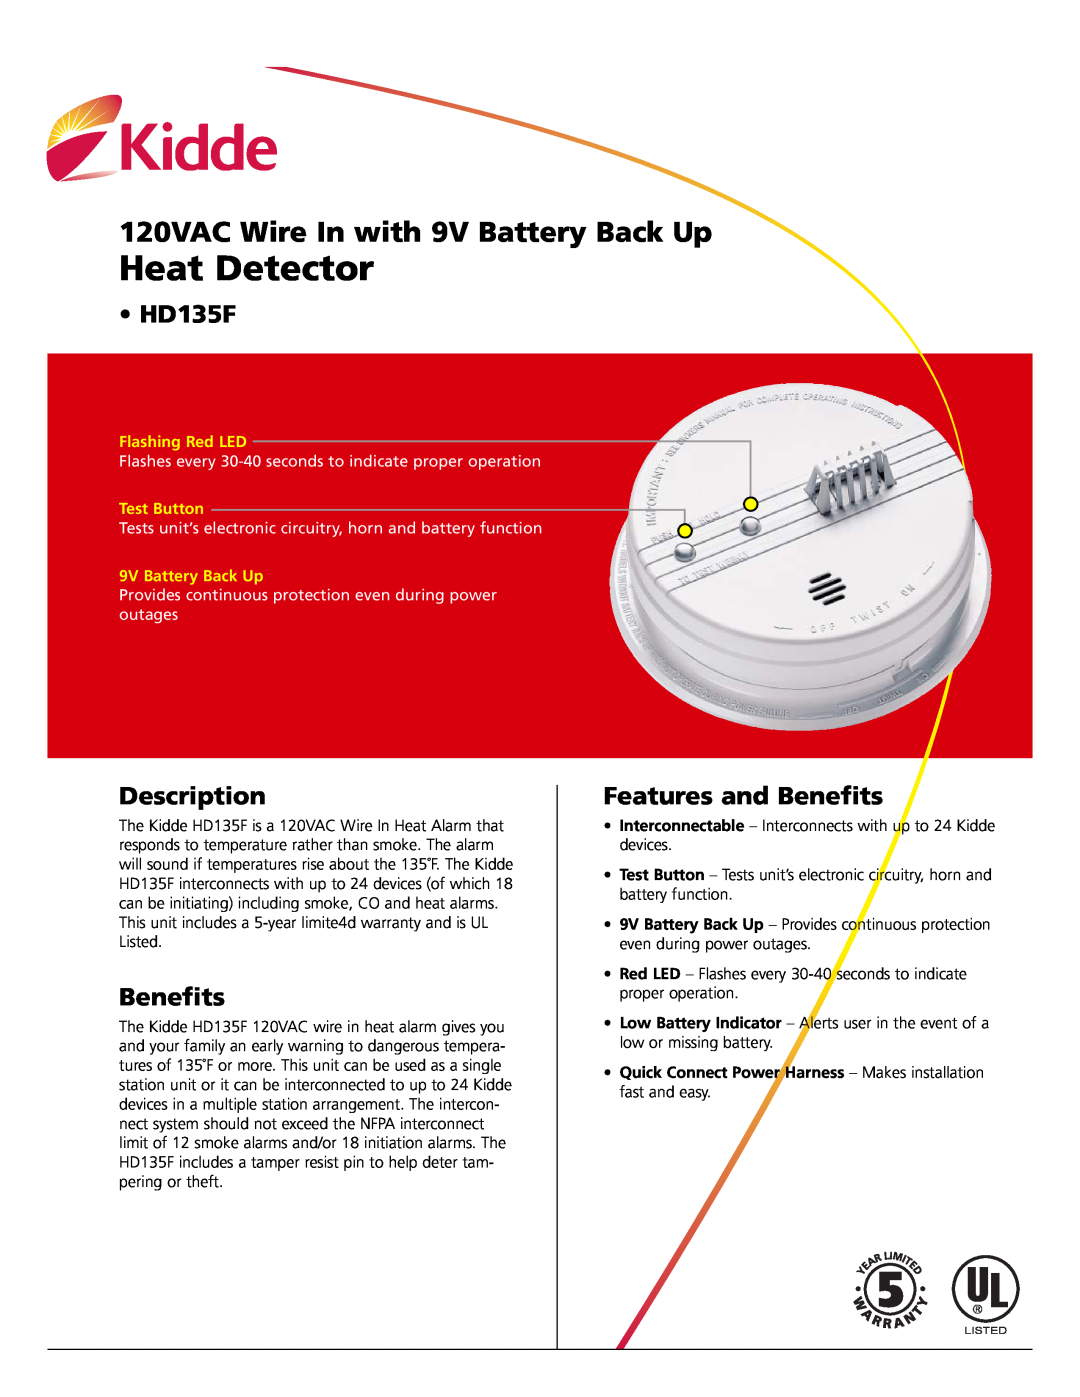 Kidde HD135F warranty Description, Features and Benefits, Flashing Red LED, Test Button, 9V Battery Back Up 